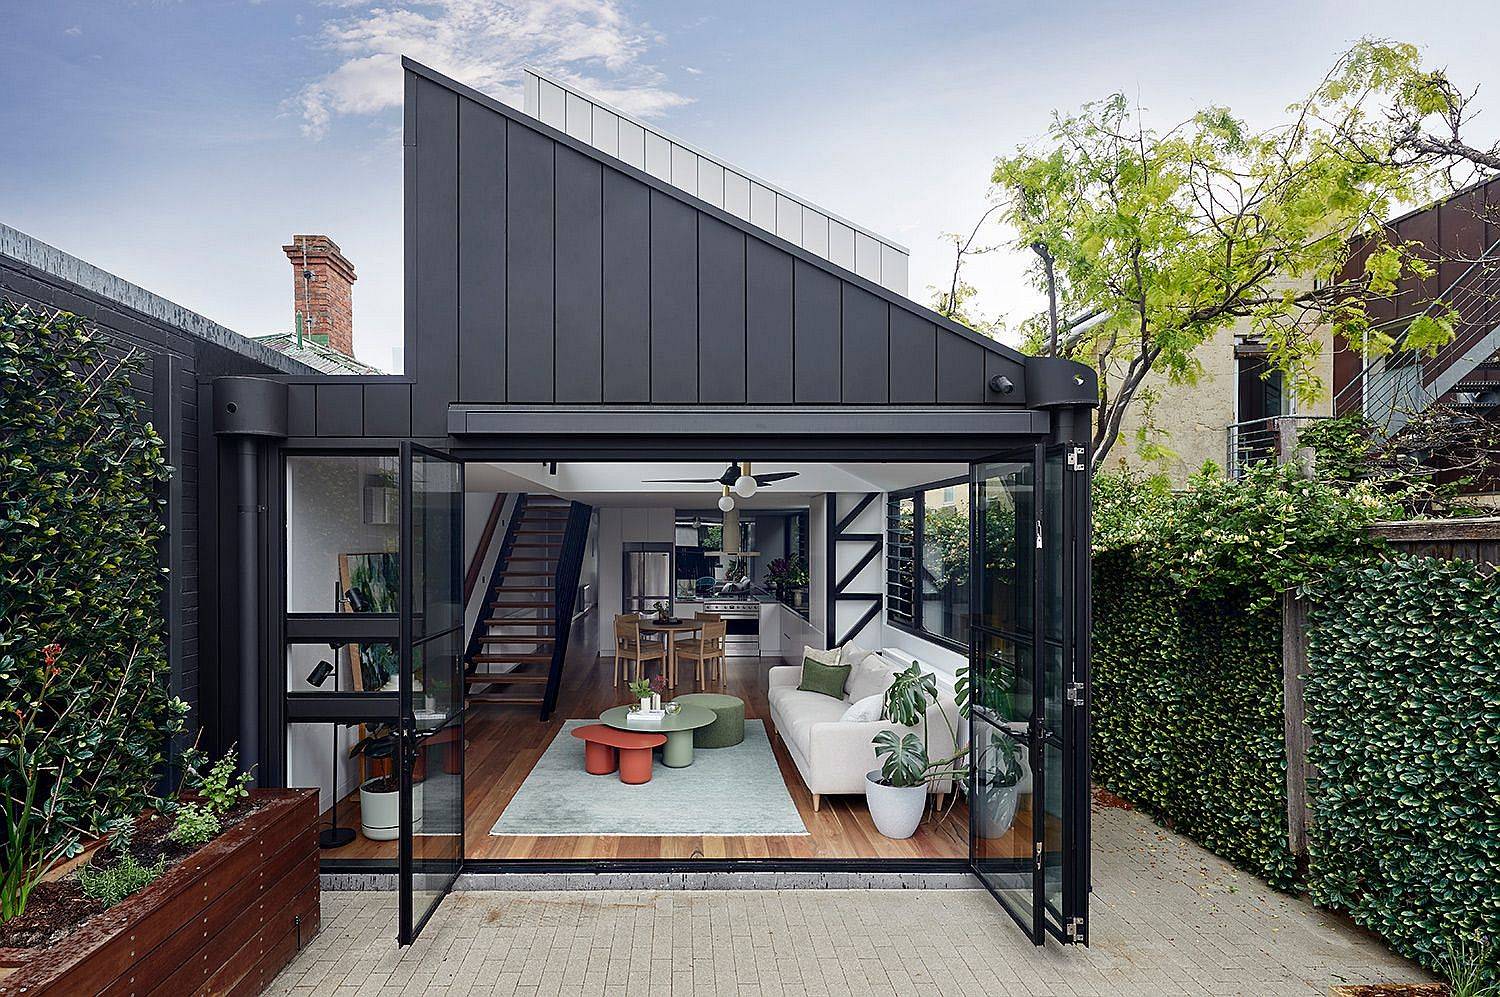 Fabulous-full-width-bi-fold-glass-doors-and-dark-contemporary-section-open-up-the-rear-extension-to-the-world-outside-79041